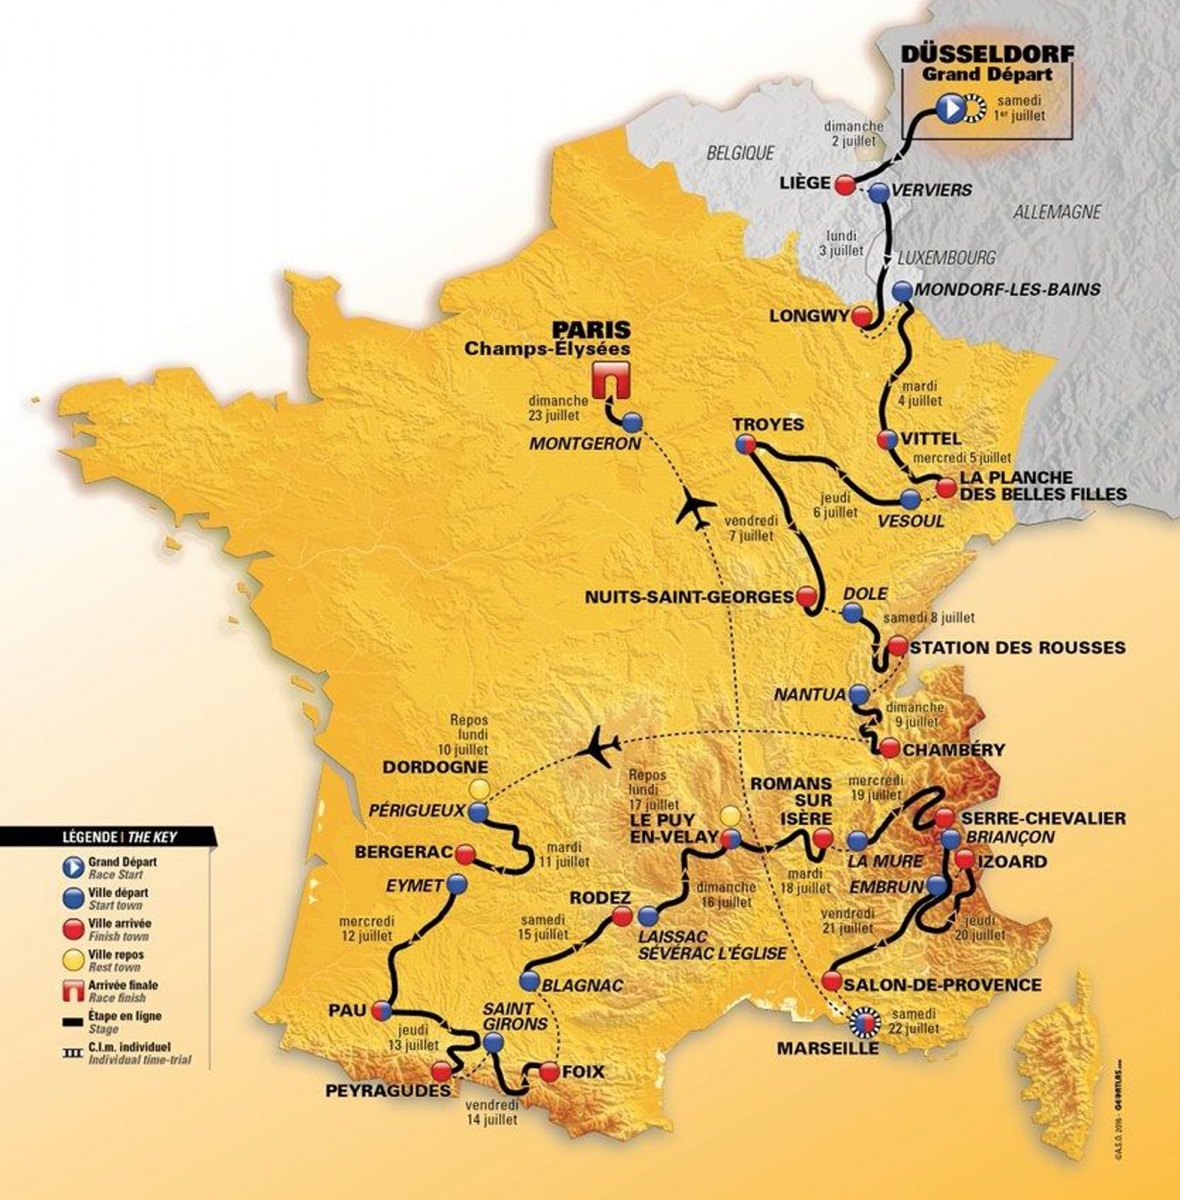 This image released by Amaury Sport Organization, (ASO), the Tour de France race's organizer, shows the official map of the 2017 Tour de France cycling race that was unveiled in Paris, France, Tuesday, Oct. 18, 2016. The race starts with a prologue in Dusseldorf, Germany, and counts 20 stages. (ASO via AP) France Cycling Tour de France